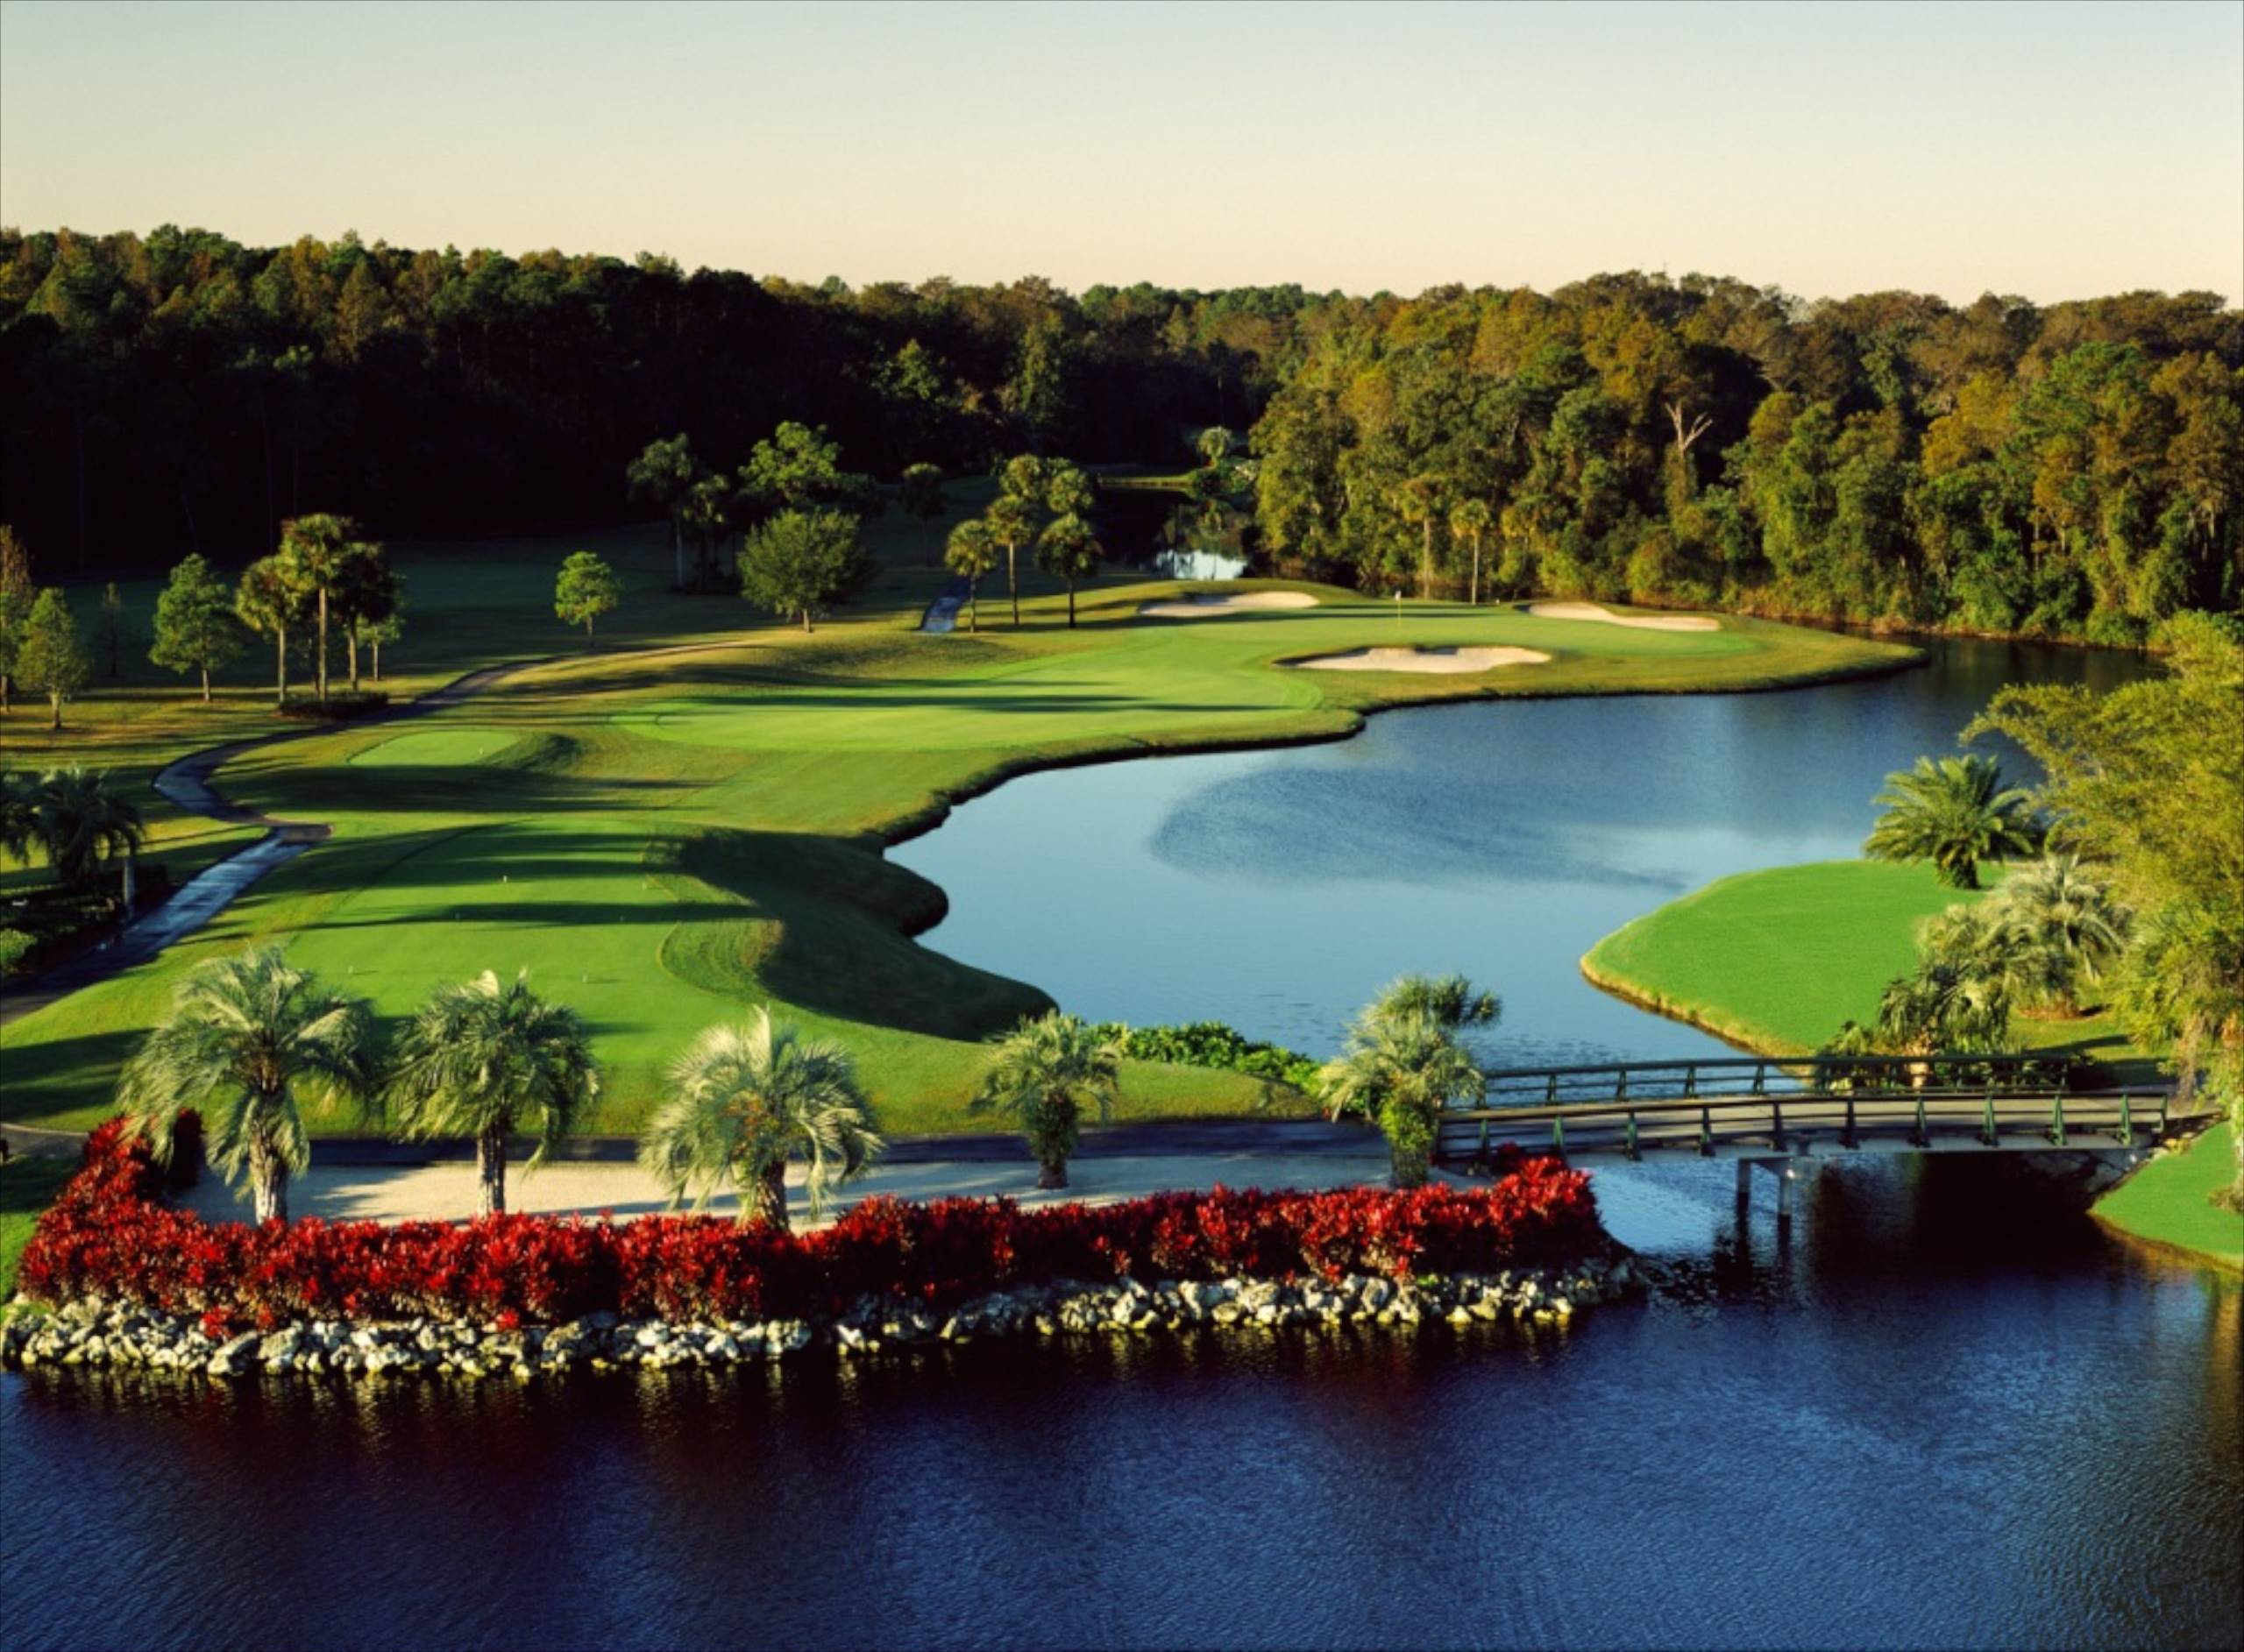 All Disney World golf courses are closed today due to severe weather